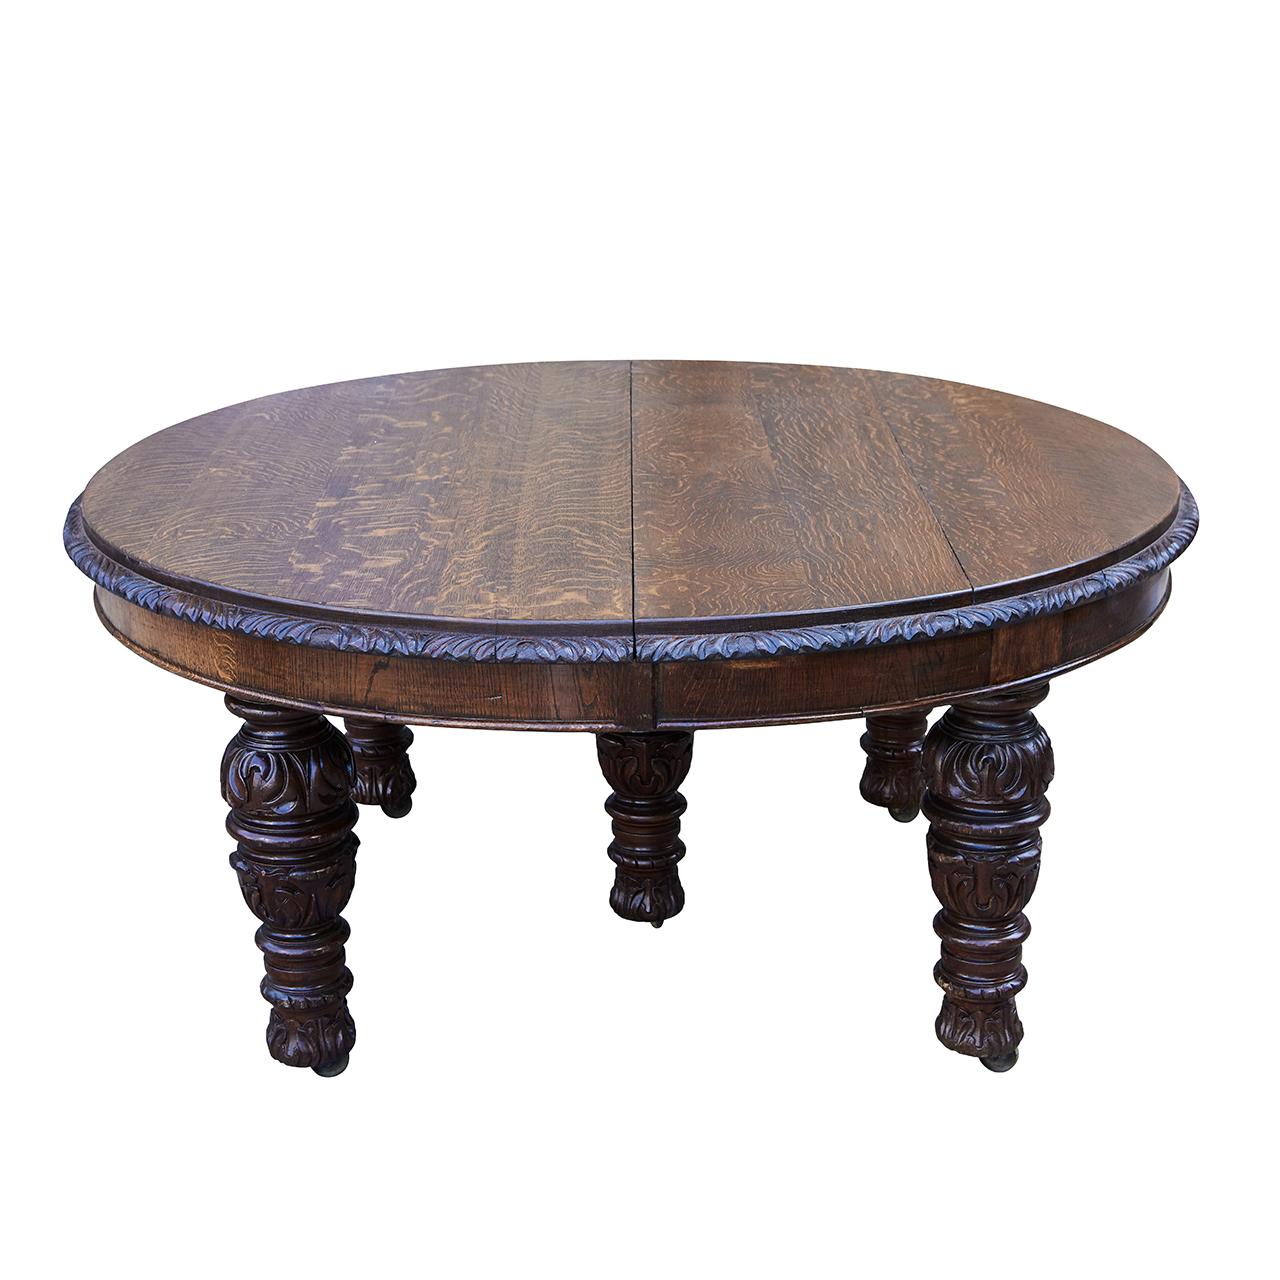 This beautifully carved oak table was made by a distinguished English manufacturer, James Phillips & Sons-Union St. Bristol, circa 1875. The piece has four center leaves that are fit into the table once it is opened by the hand crank. You have the